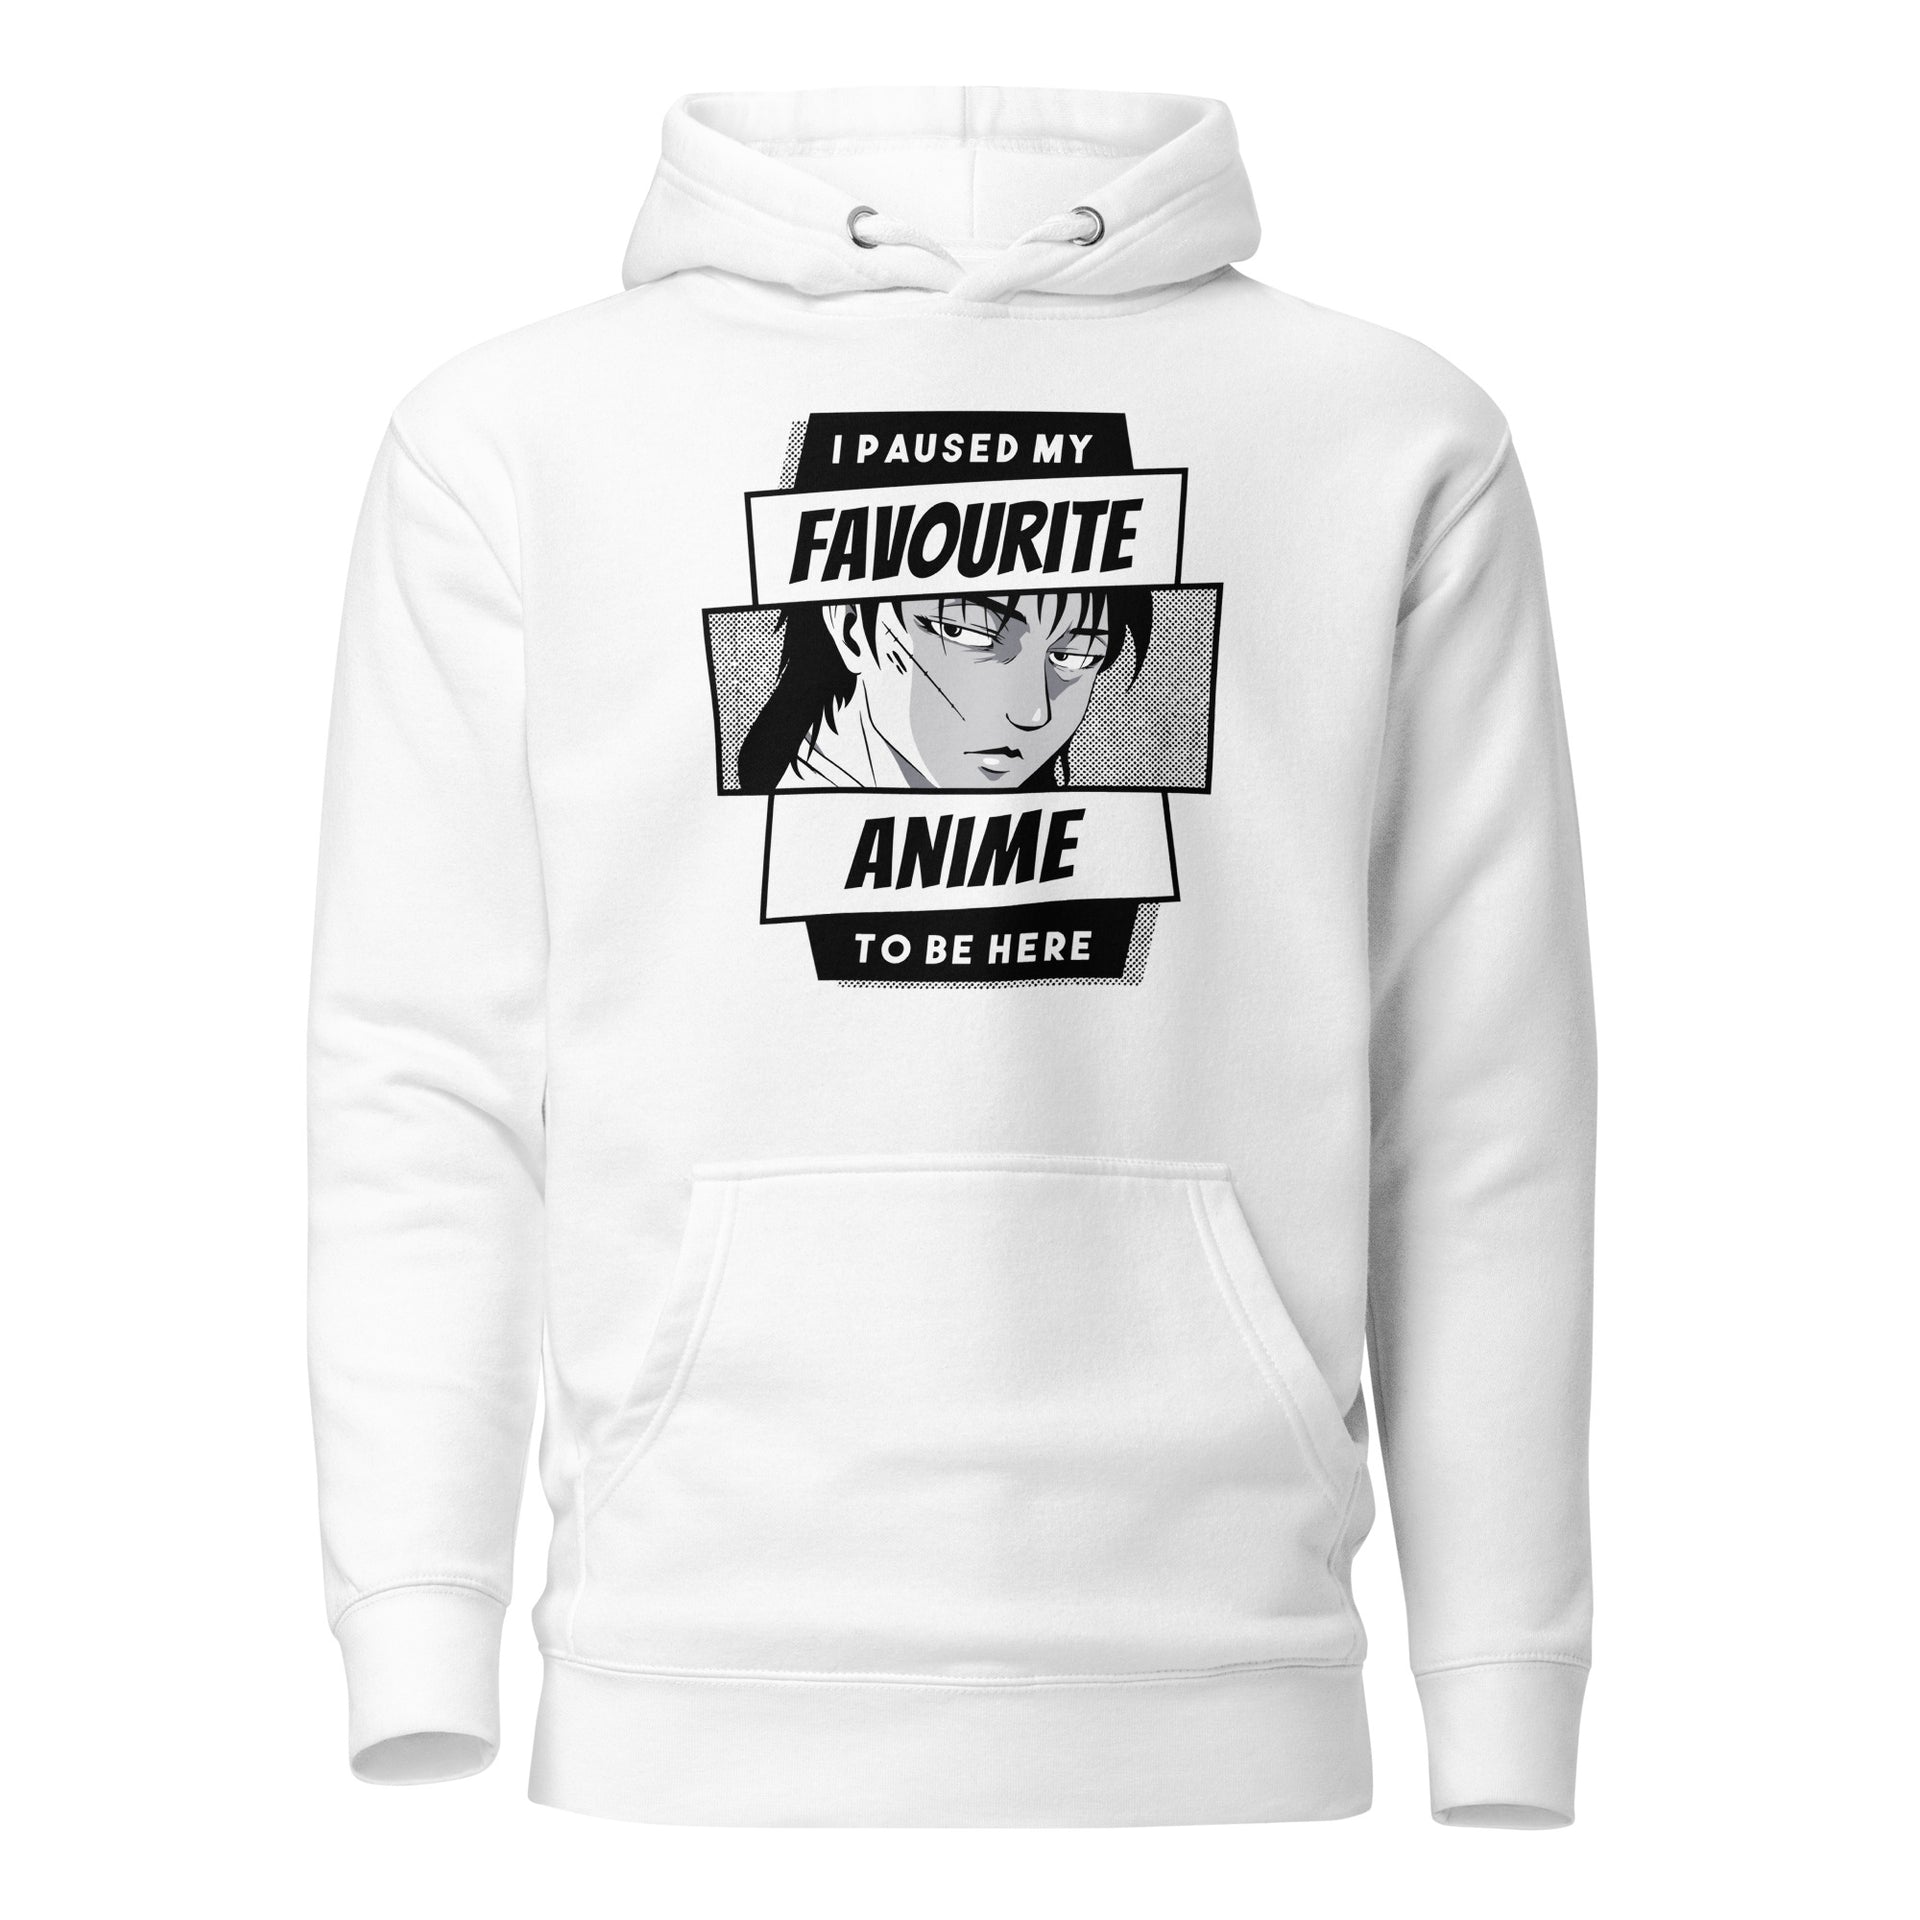 I Paused My Favorite Anime To Be Here Unisex Hoodie